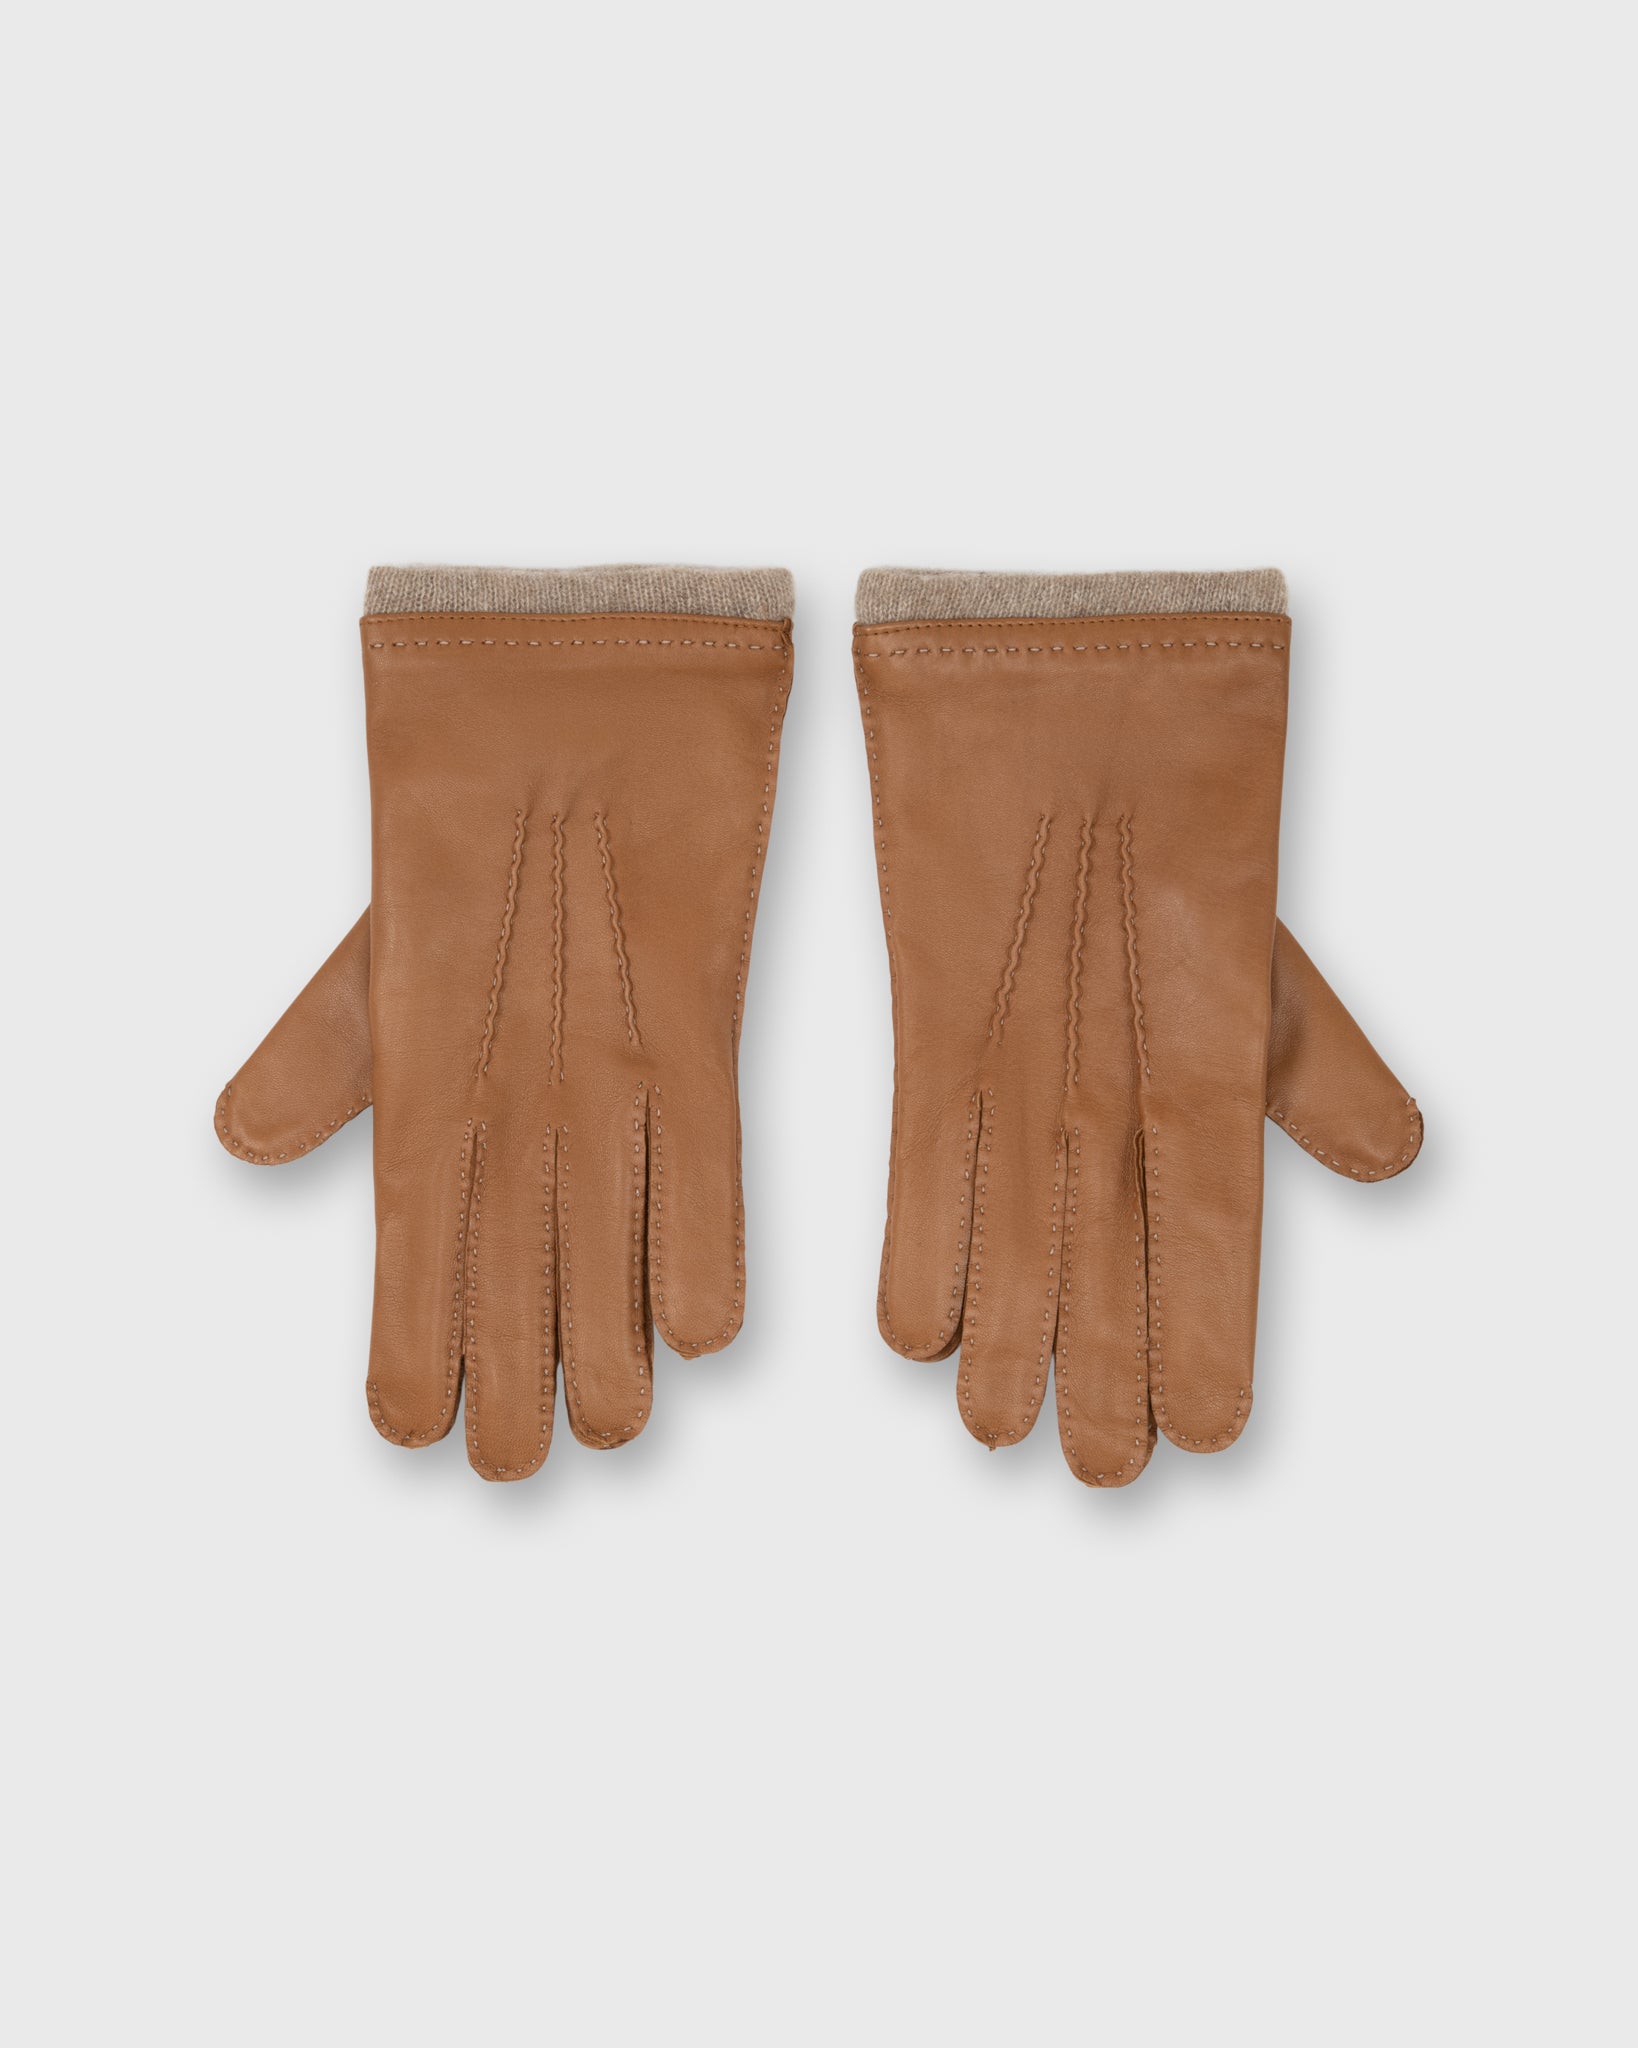 Hand-Stitched Cashmere-Lined Gloves in Camel Nappa Leather